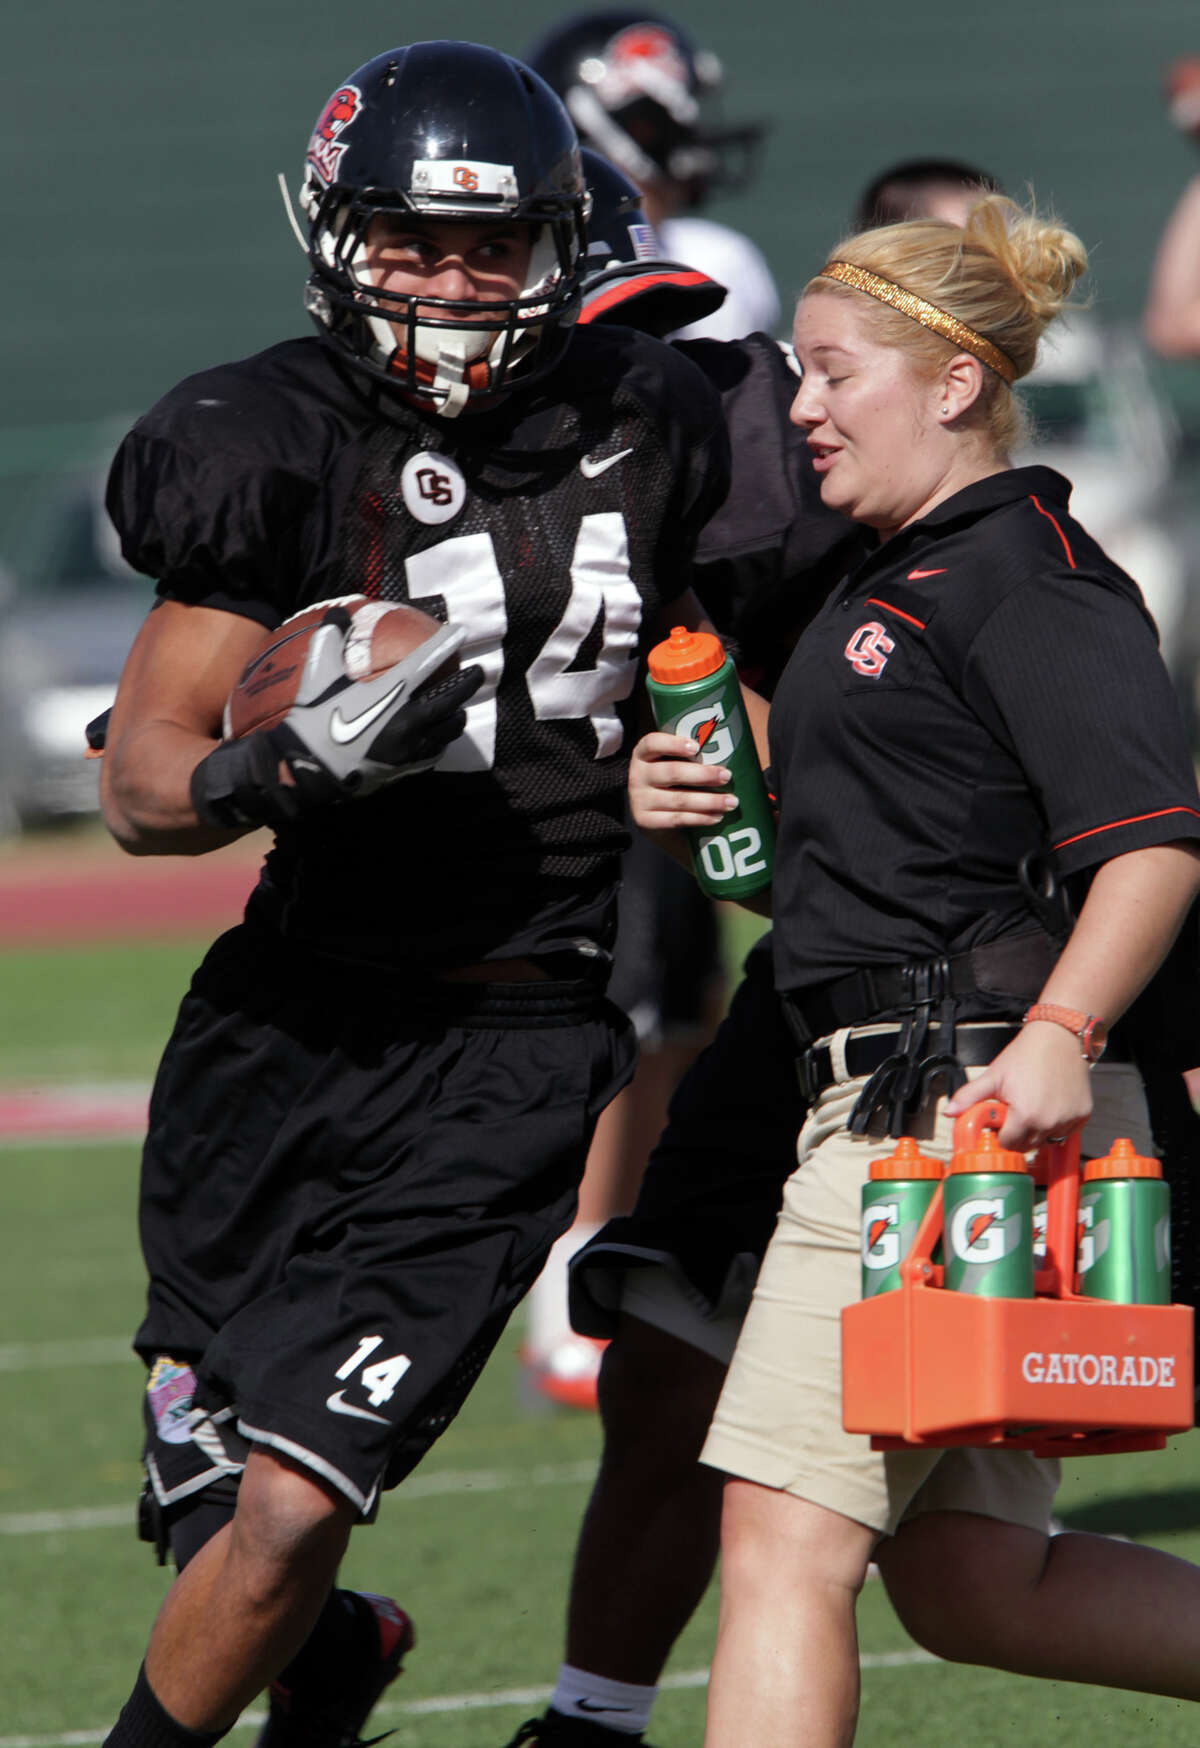 Oregon State Beavers Jordan Poyer nearly colides with a trainer during practice at Benson Stadium, University of the Incarnate Word. Monday, Dec. 24, 2012.